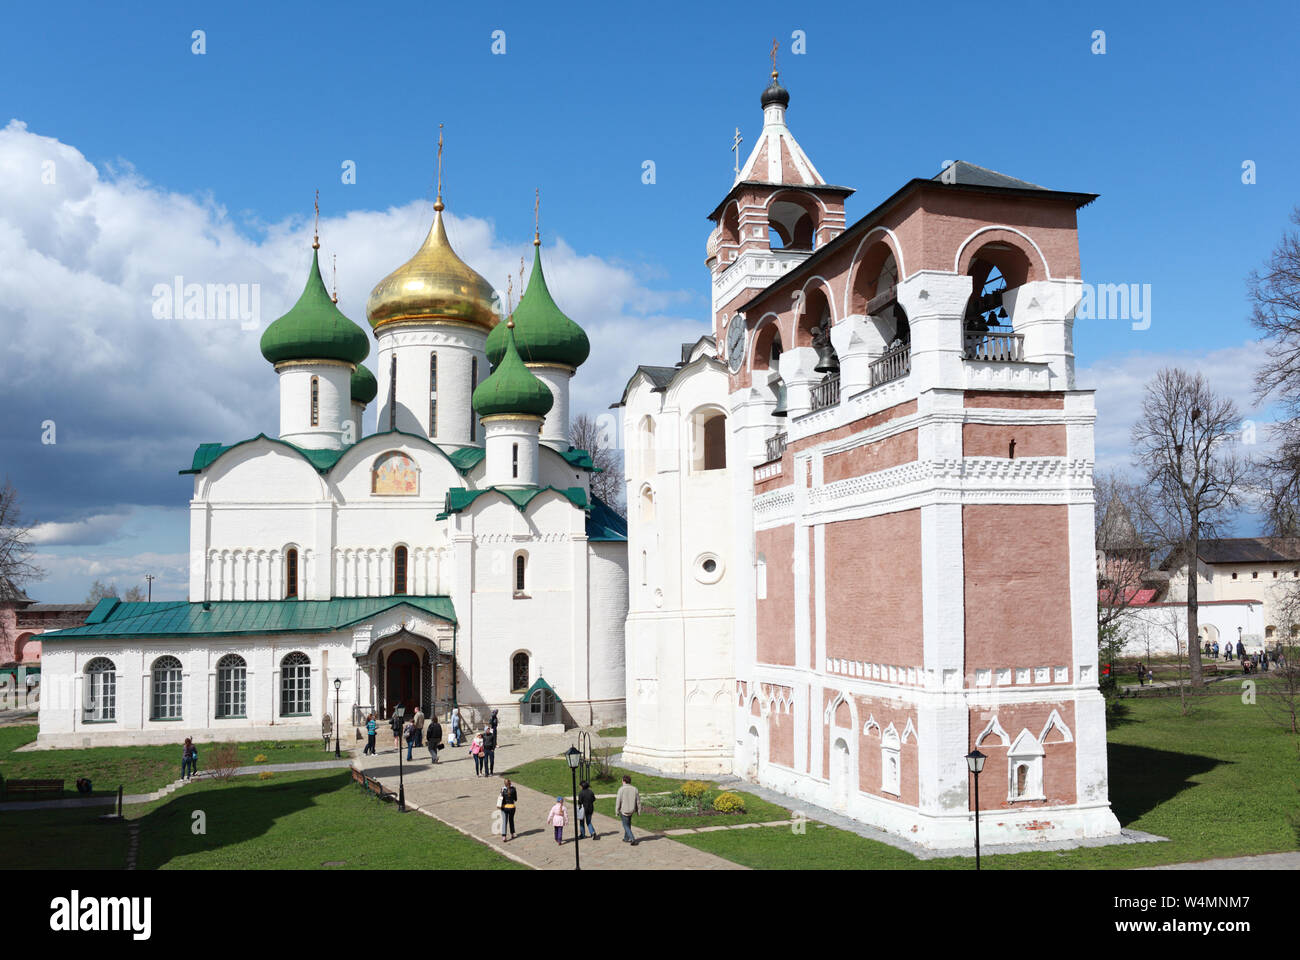 People at Transfiguration Cathedral with its Belfry in the Saviour Monastery of Saint Euthymius in Suzdal, Russia. Stock Photo